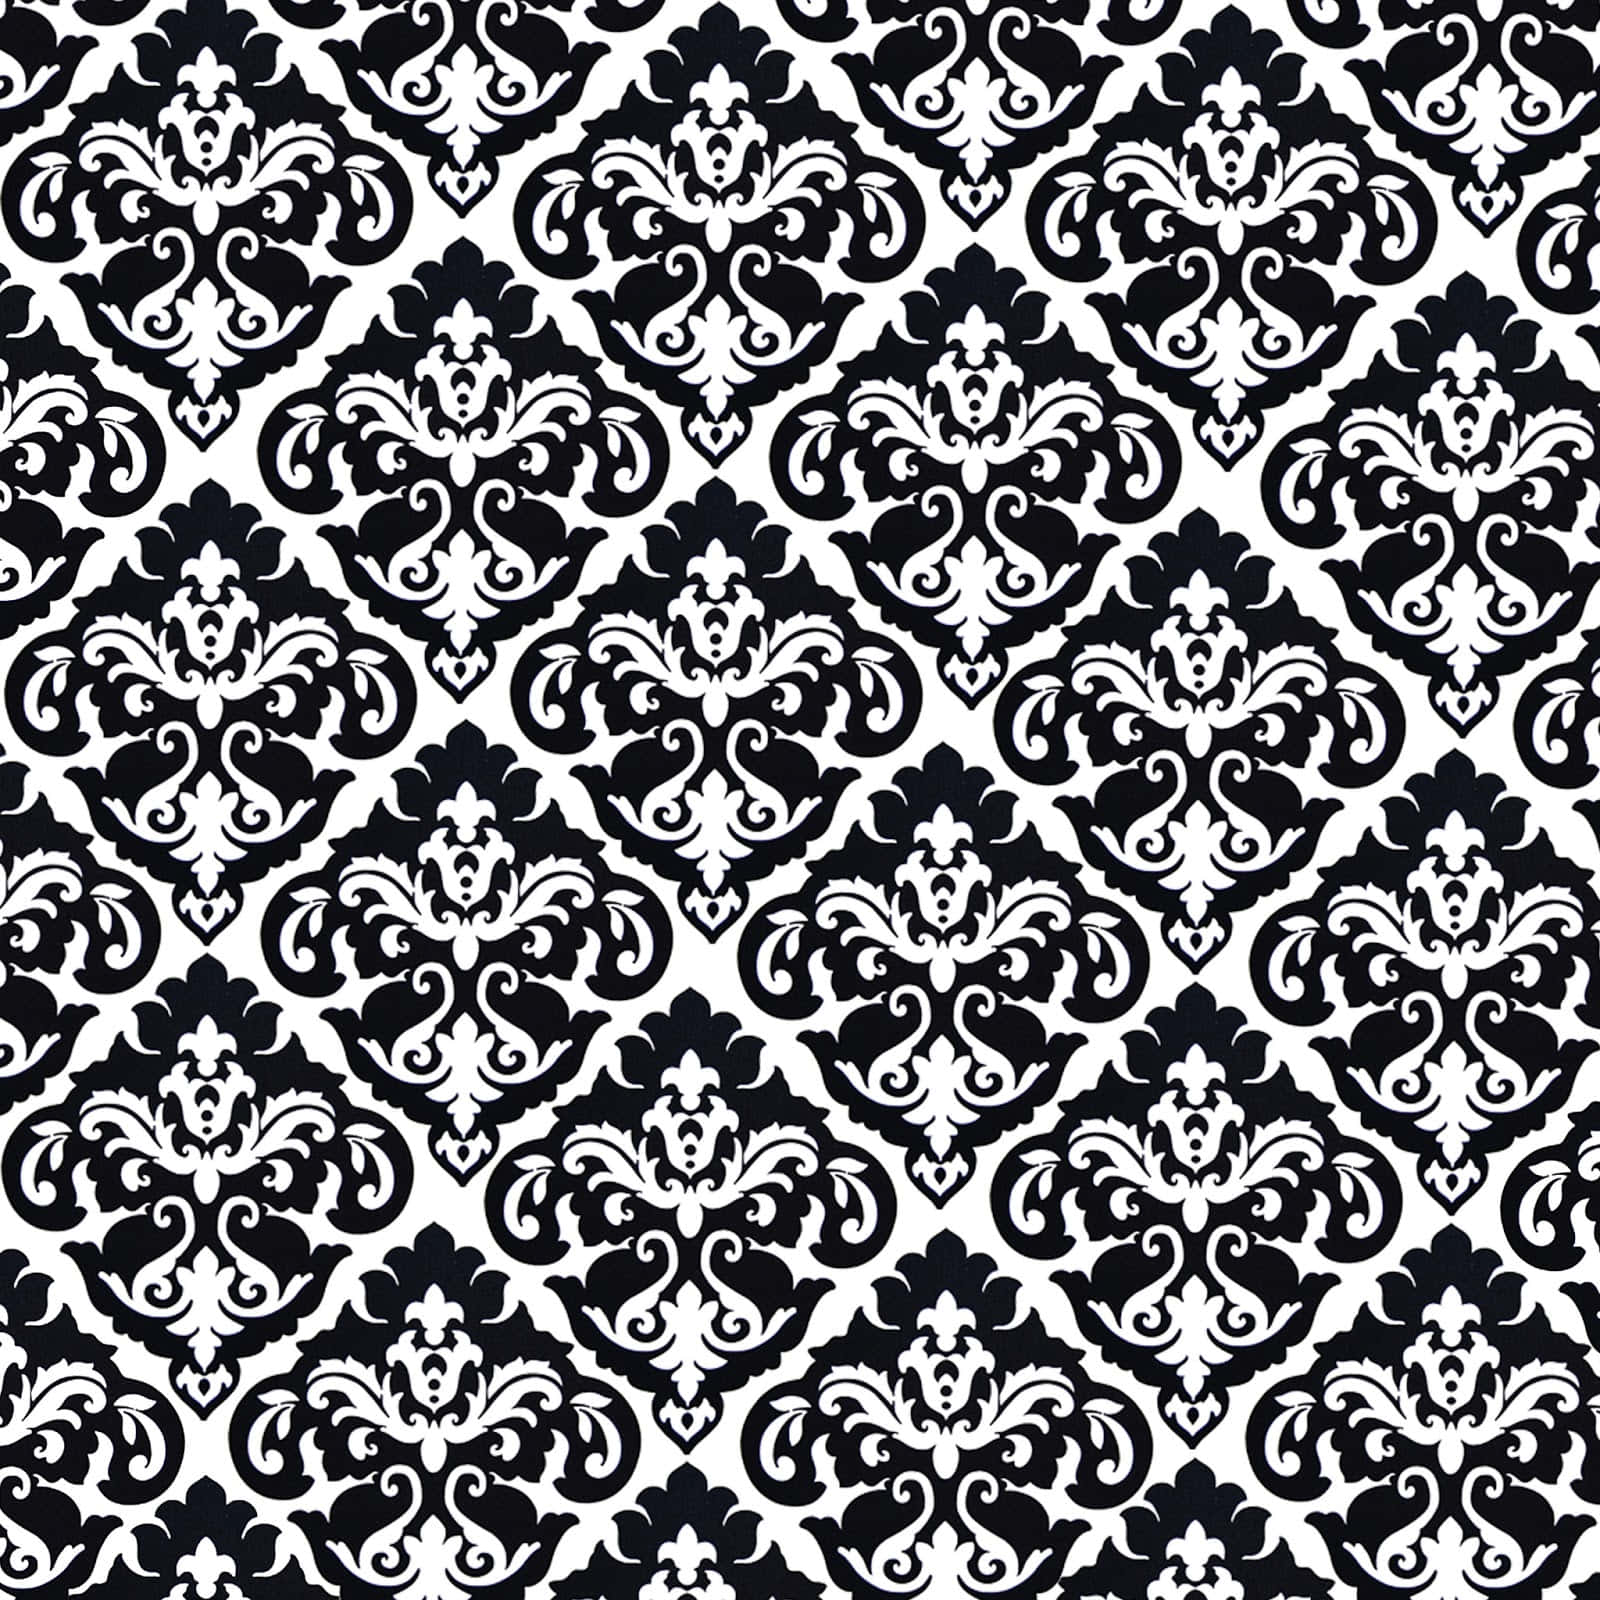 Monochrome Symphony – An Intricate Pattern In Black And White